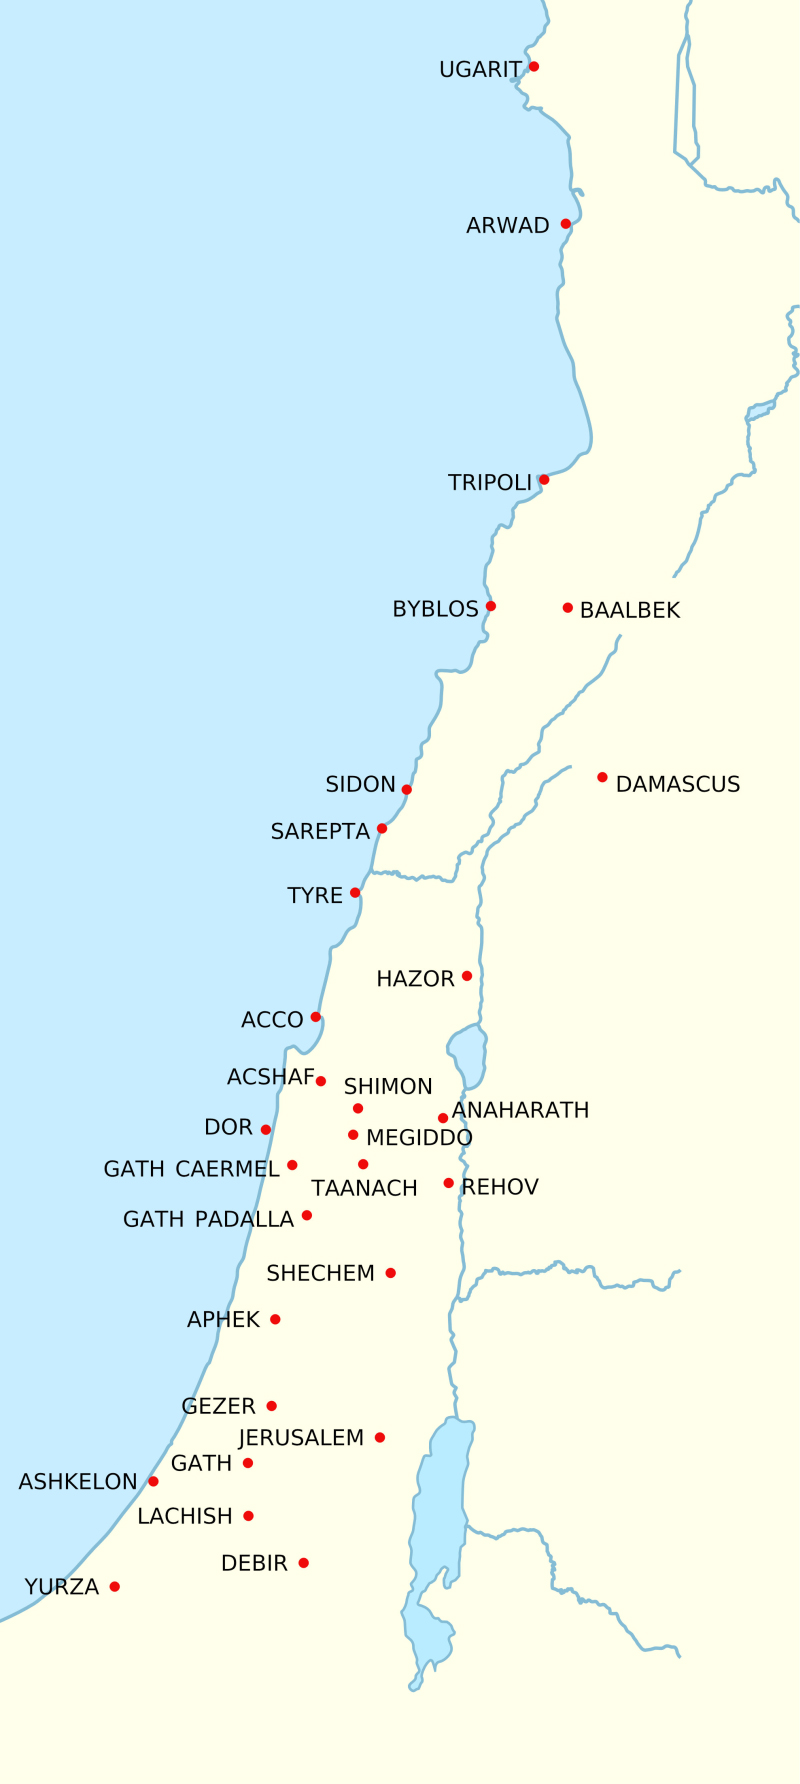 The major Canaanite city-states in the Bronze Age (map: IYY, CC BY-SA 4.0)